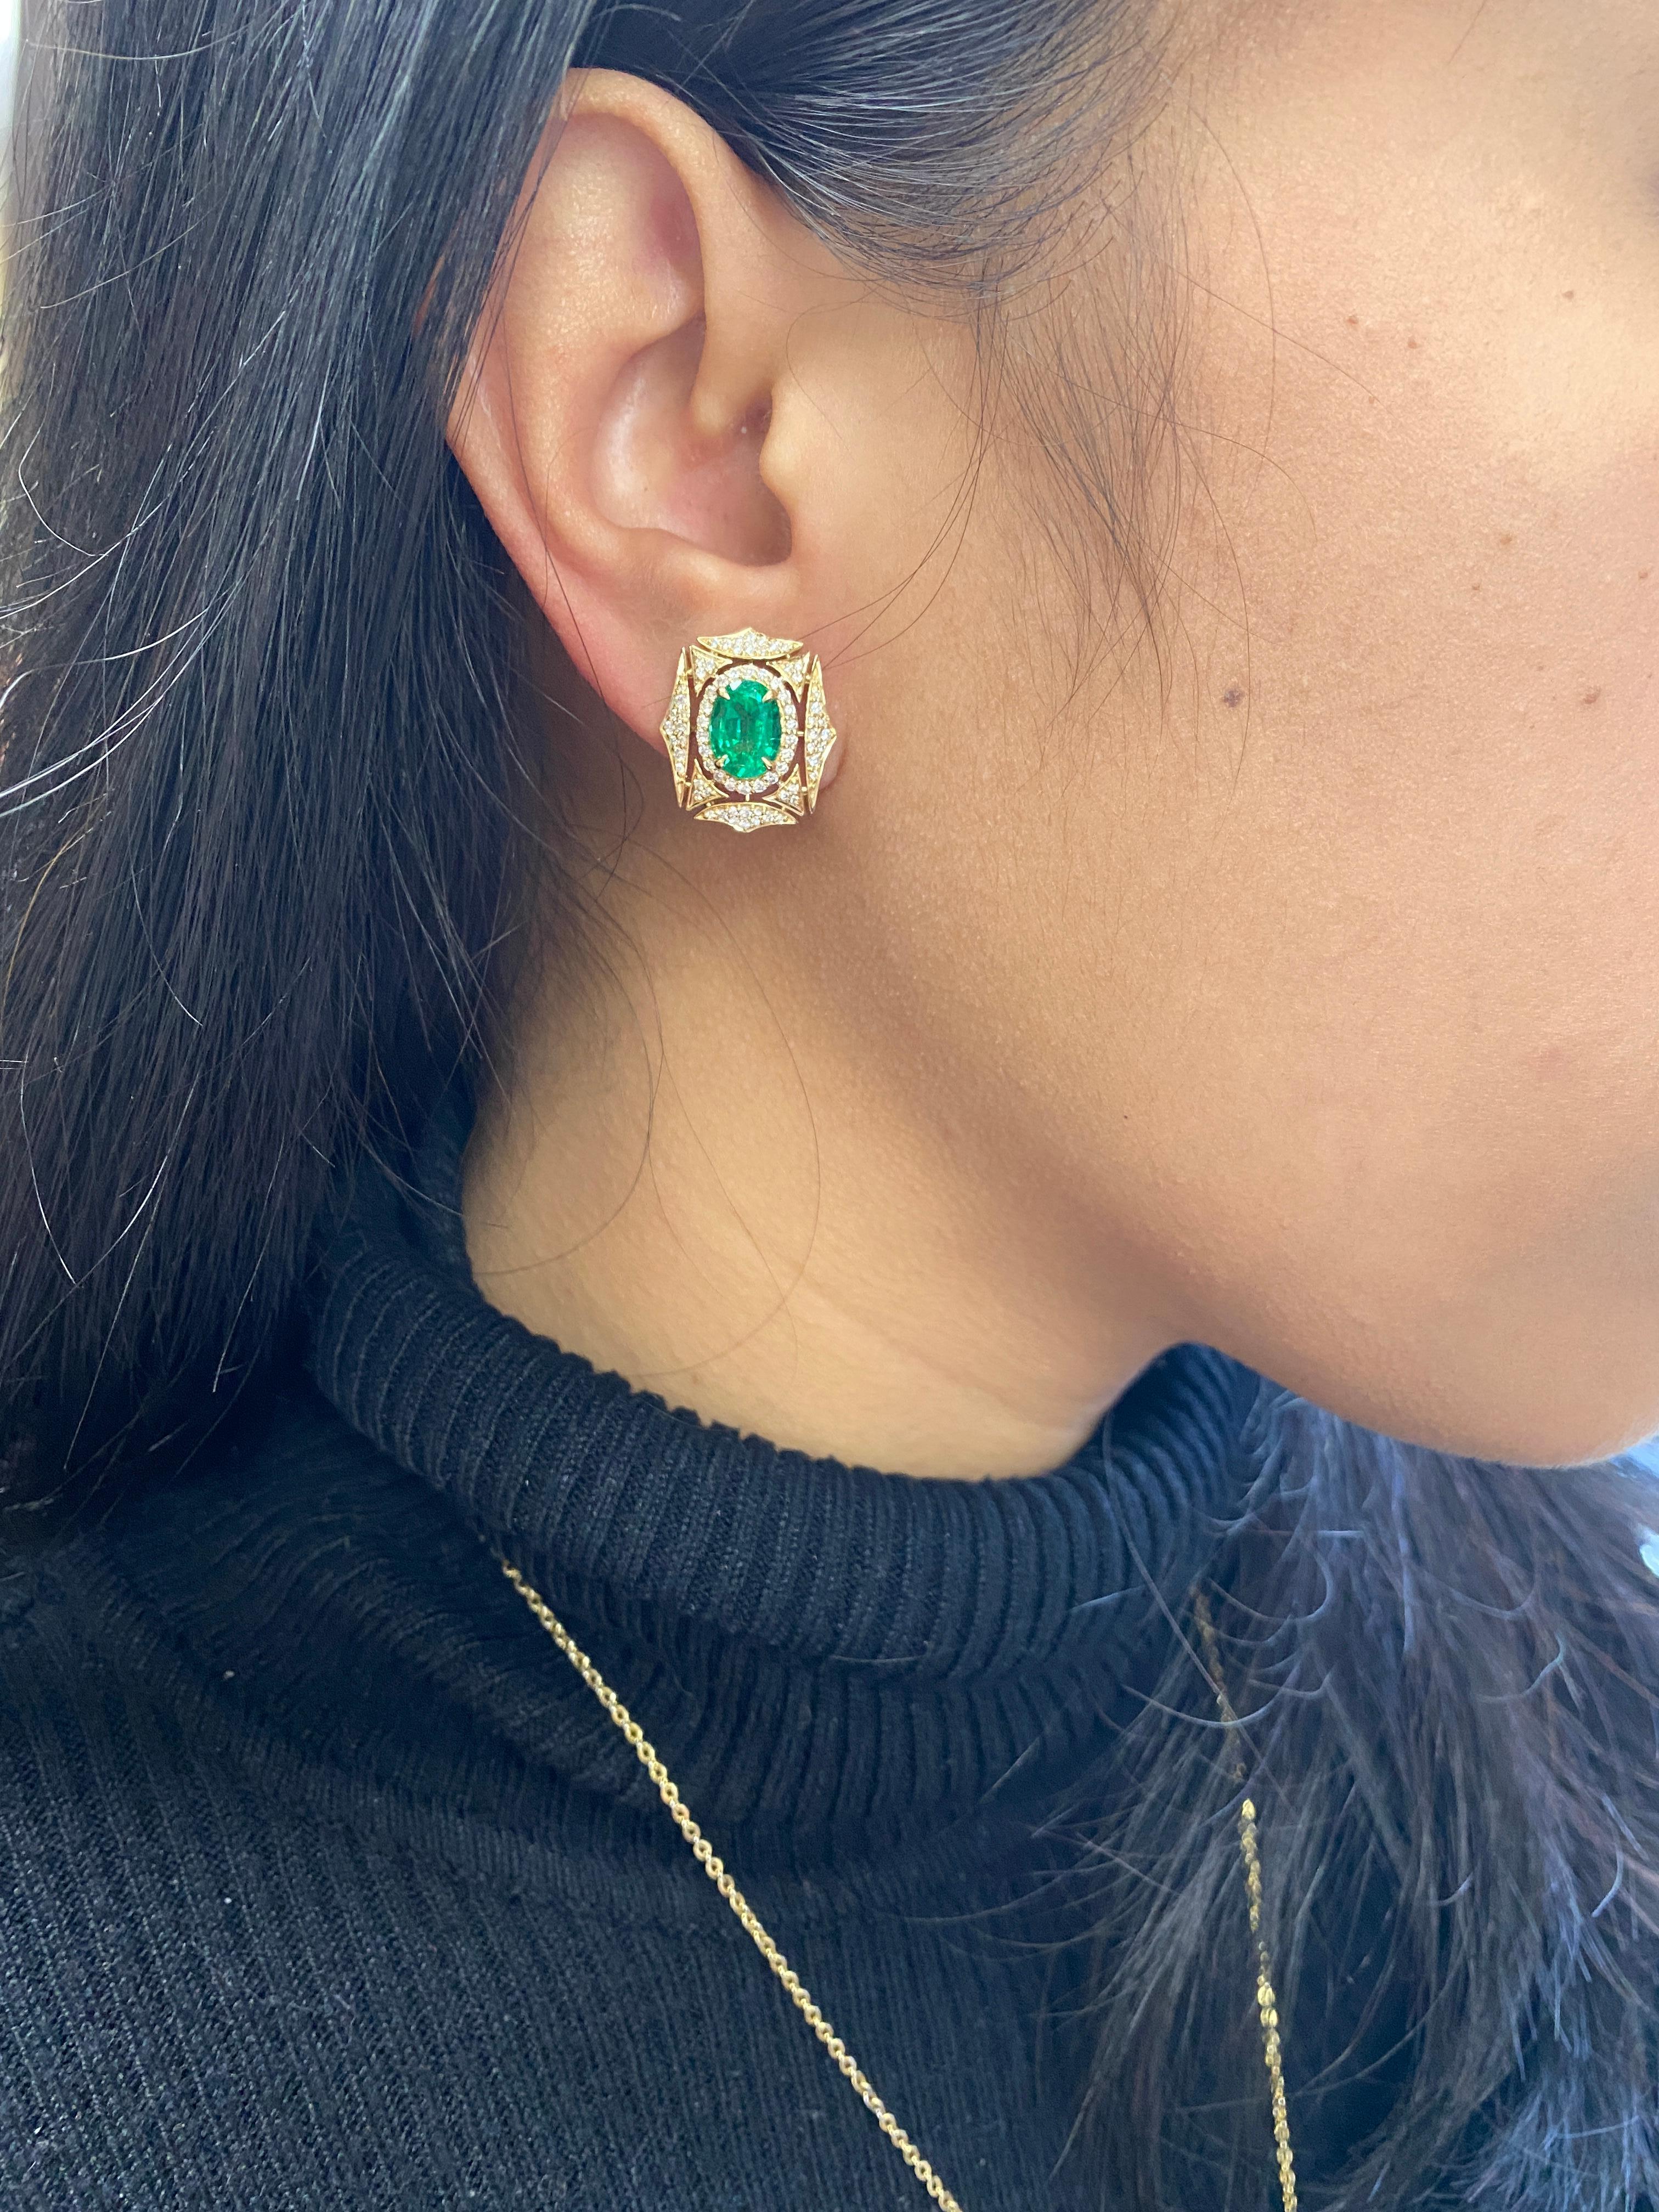 Faceted Oval Emerald and Diamond Web Earrings in 18K Yellow Gold, from ‘G-One' Collection. Elegance and uniqueness, all in one piece!

* Gemstone size: 8 x 6 mm
* Gemstone: 100% Earth Mined 
* Approx. gemstone Weight: 2.58 Carats (Emerald)

* 100%